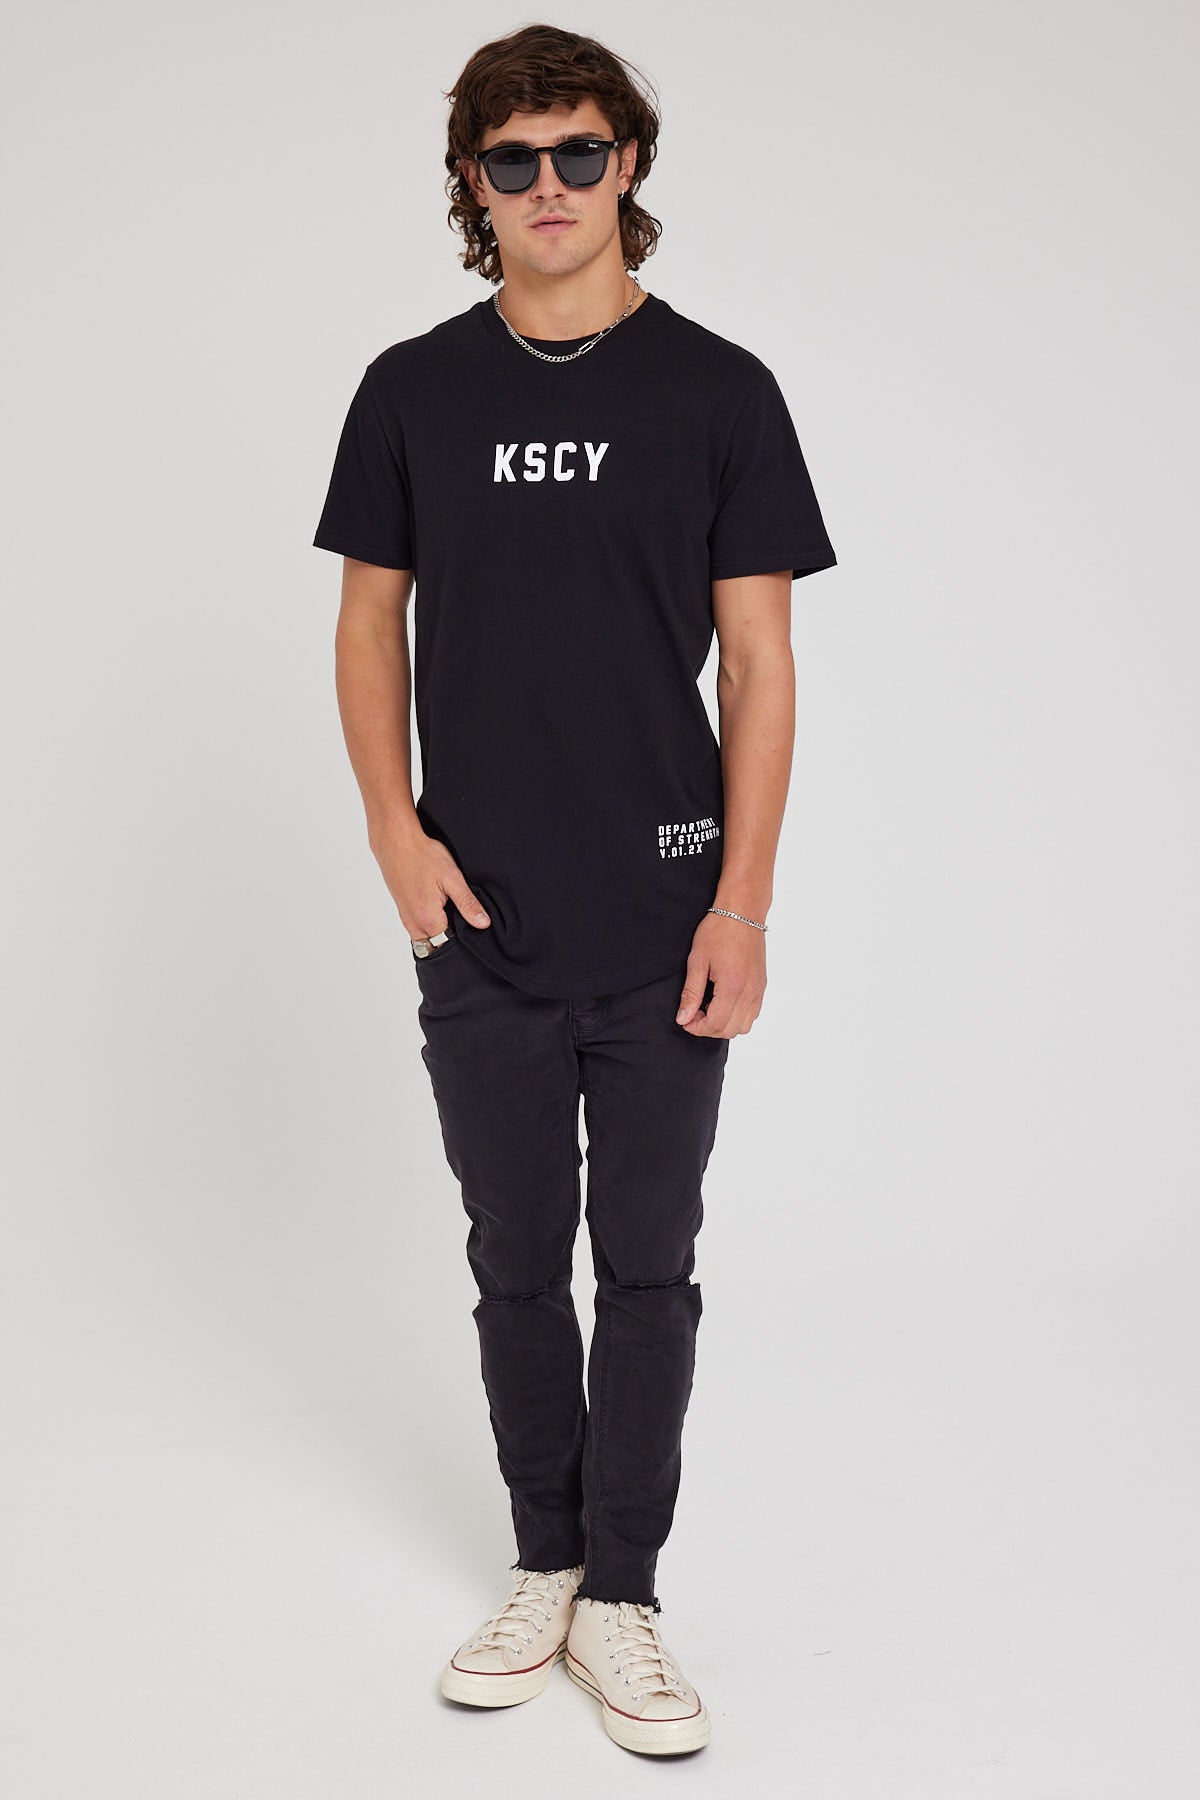 Kiss Chacey Overdose Dual Curved Tee Jet Black